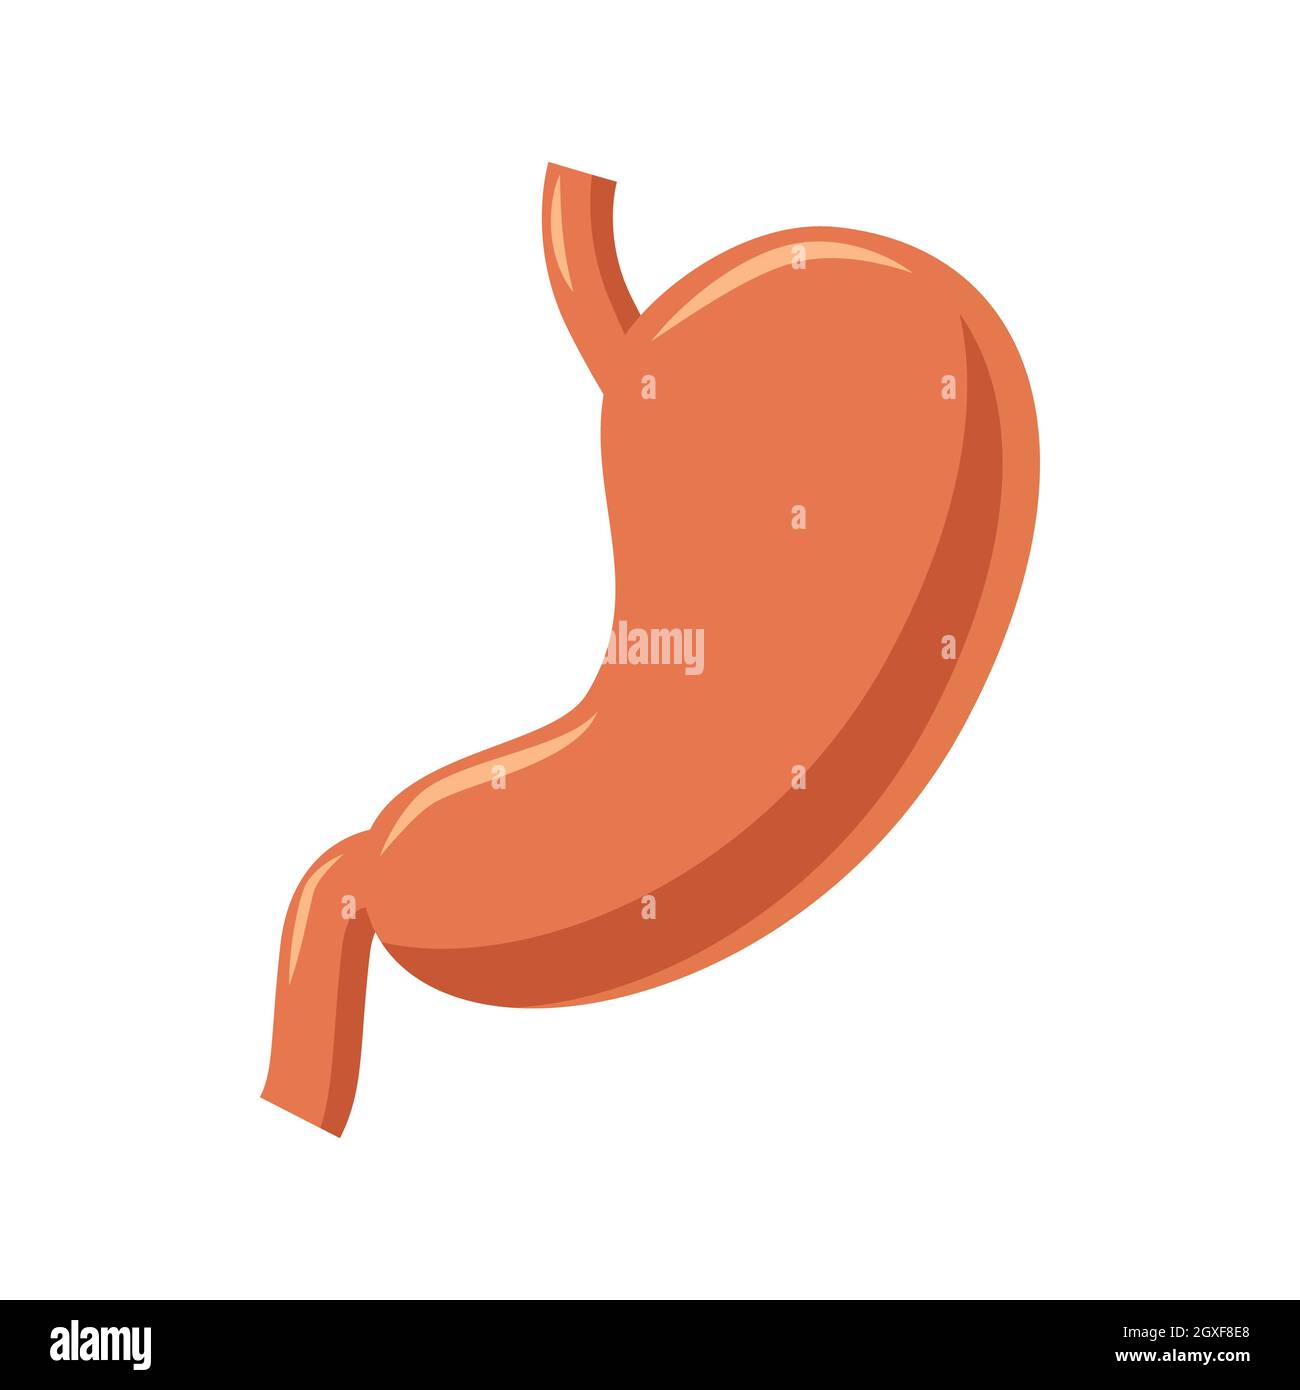 Stomach icon in cartoon style on a white background Stock Photo